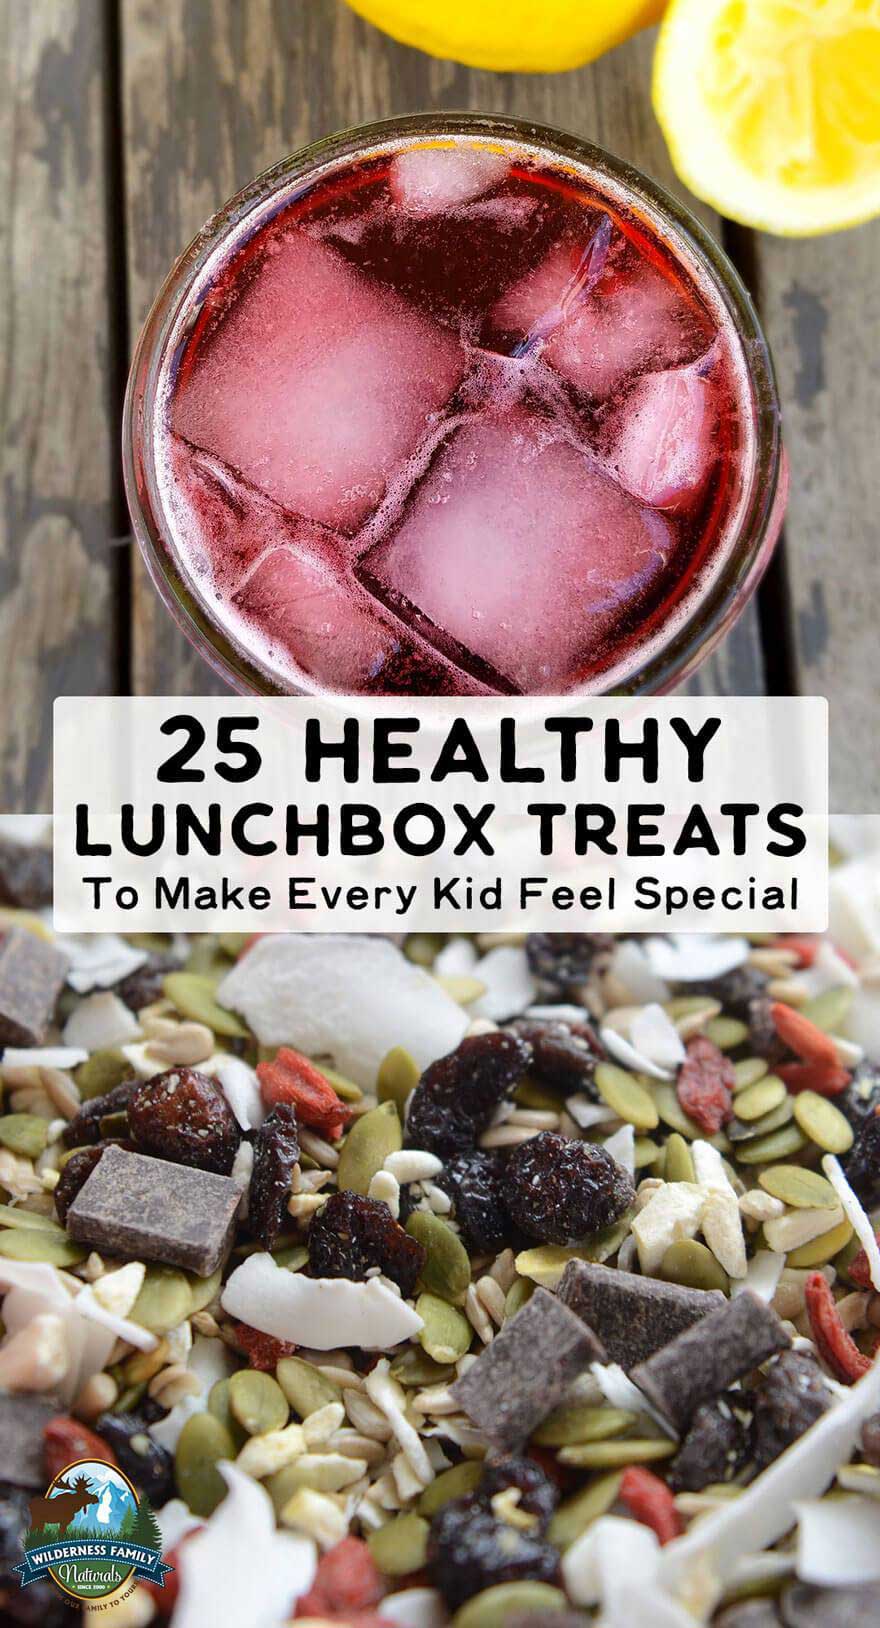 25 Healthy Lunchbox Treats To Make Every Kid Feel Special!